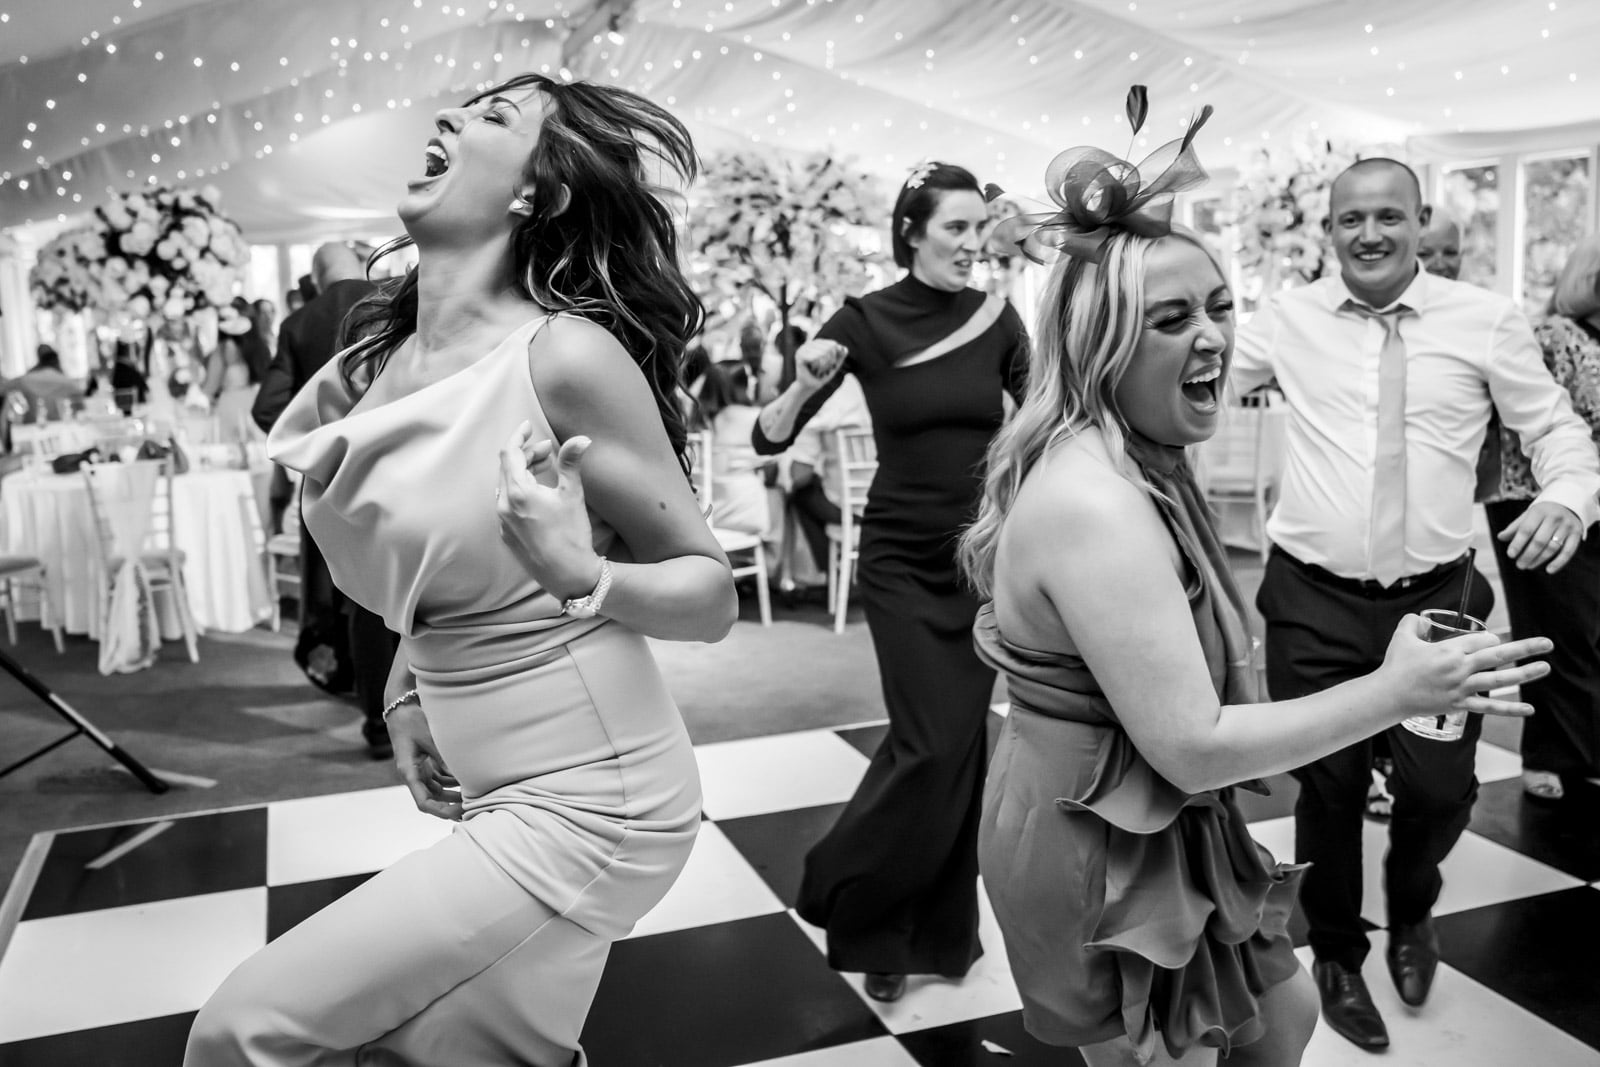 The wedding guests have a brilliant time on the dancefloor natural wedding photography